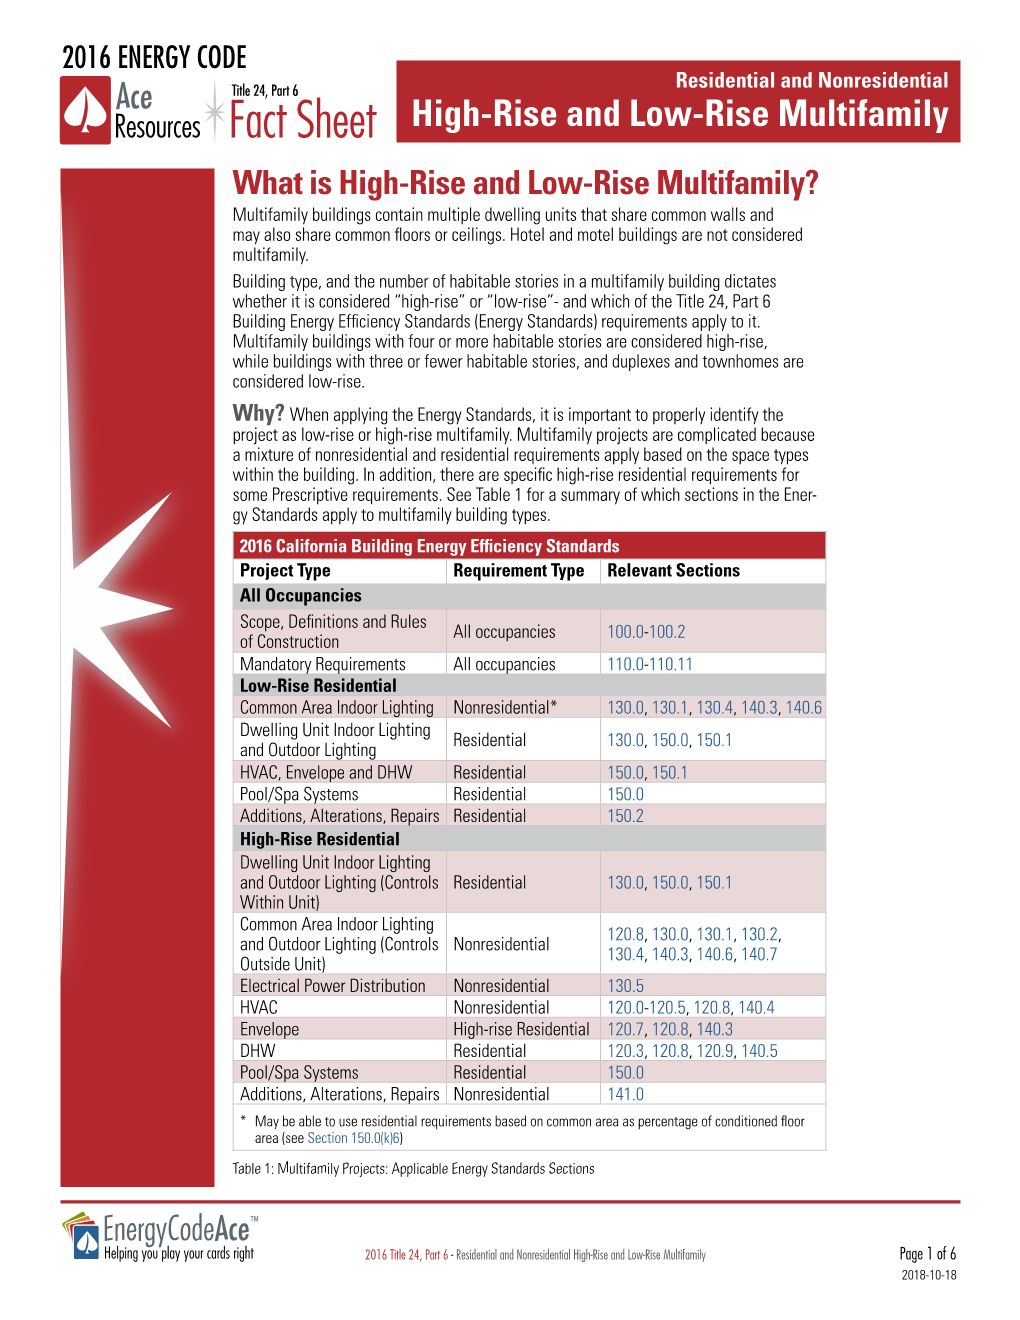 Fact Sheet: High-Rise and Low-Rise Multifamily 2016